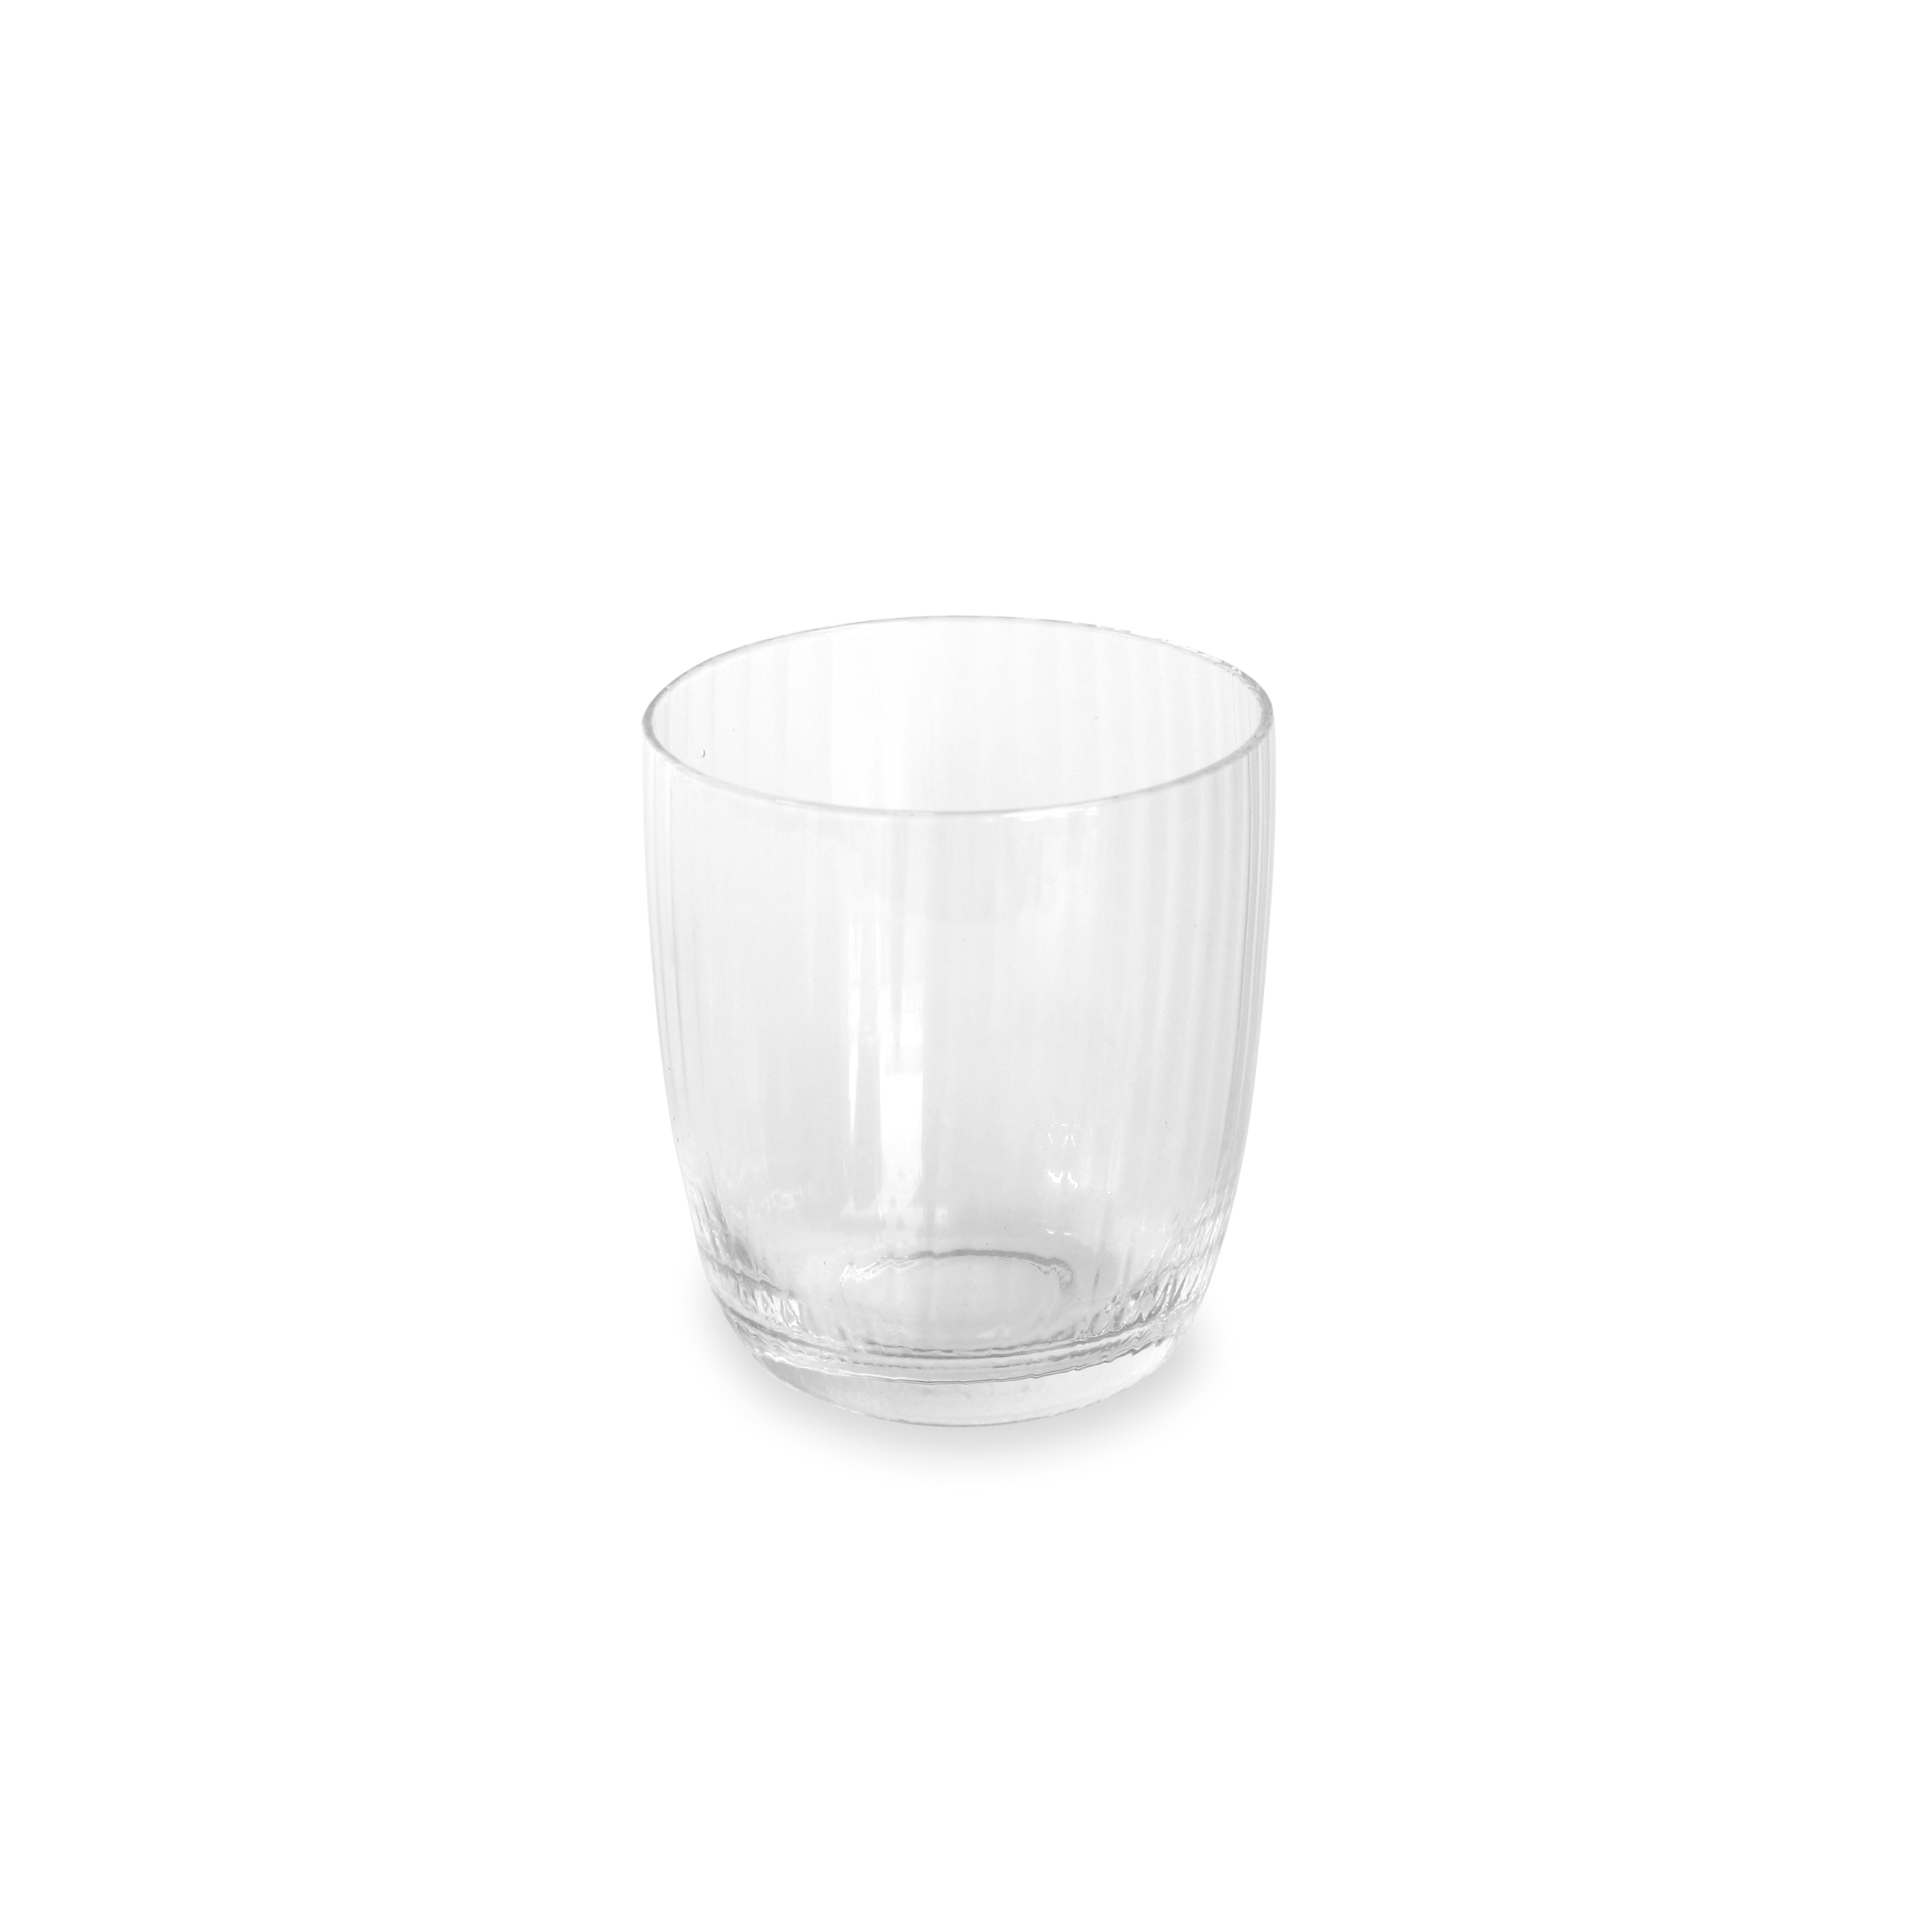 GLASS Venice Stemless Wine Glass/Double Old Fashioned Set of 4 (Clear)